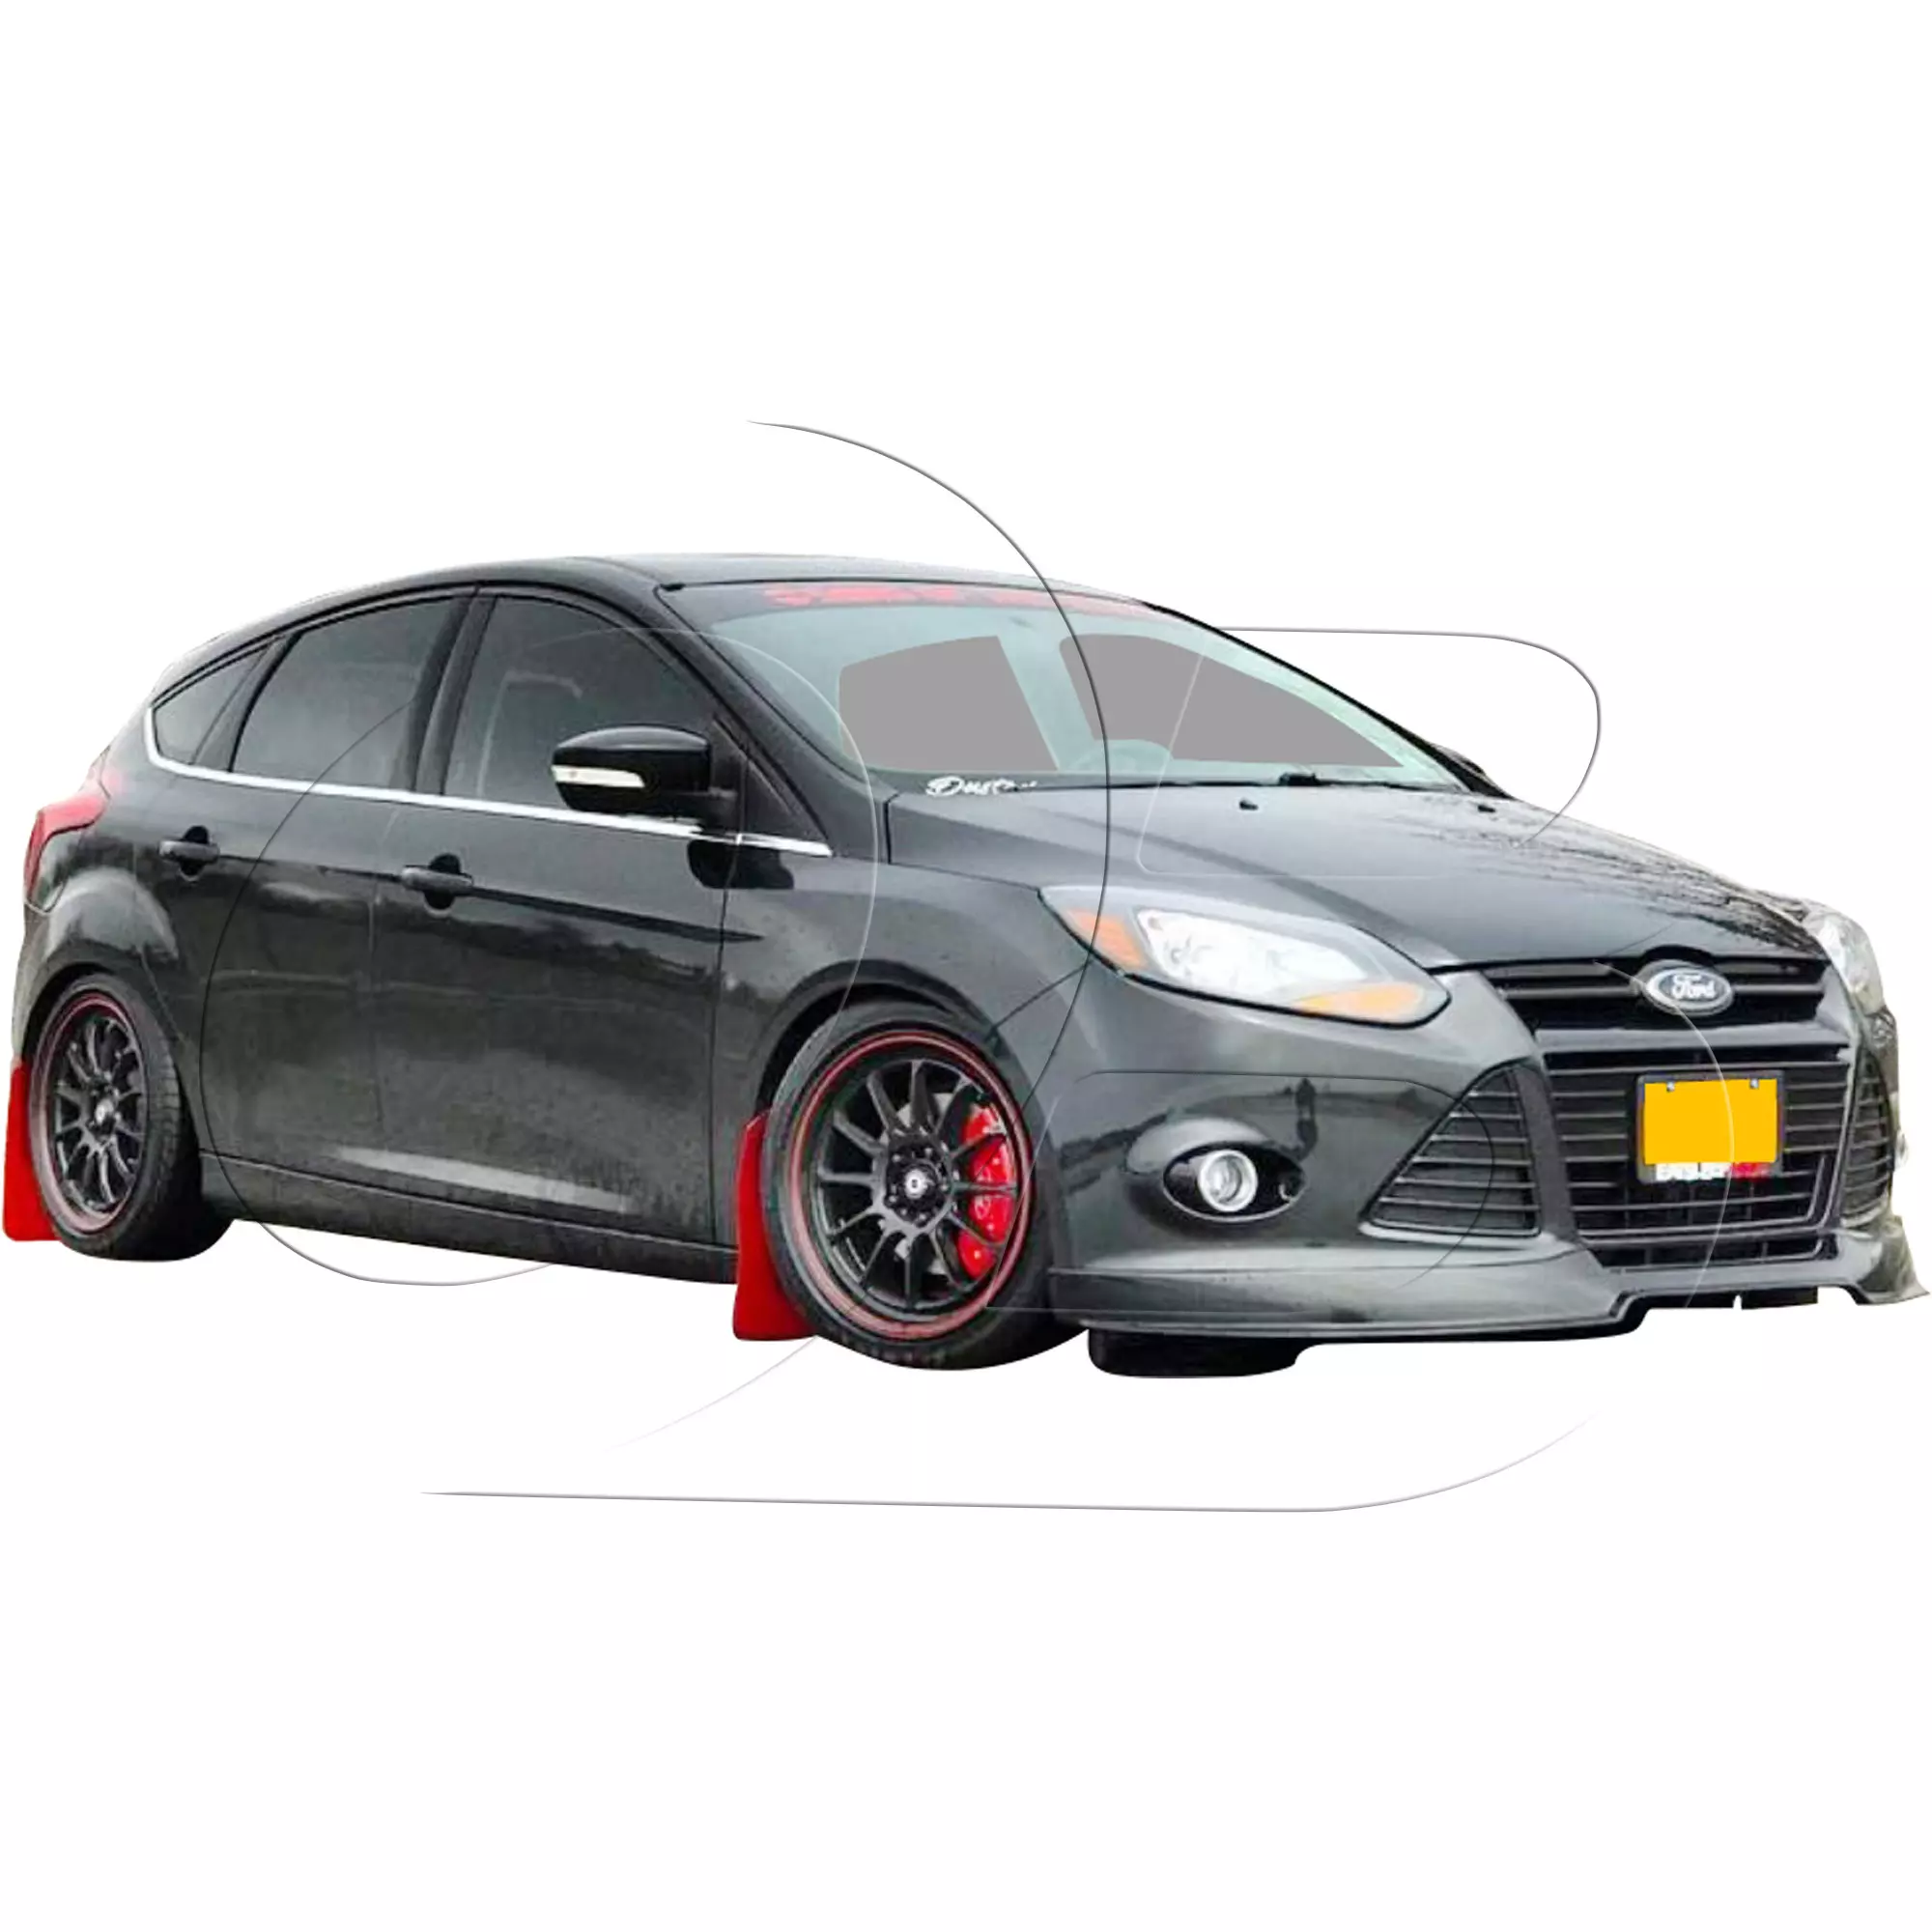 KBD Urethane BDS Style 1pc Front Lip > Ford Focus 2012-2014 - Image 4